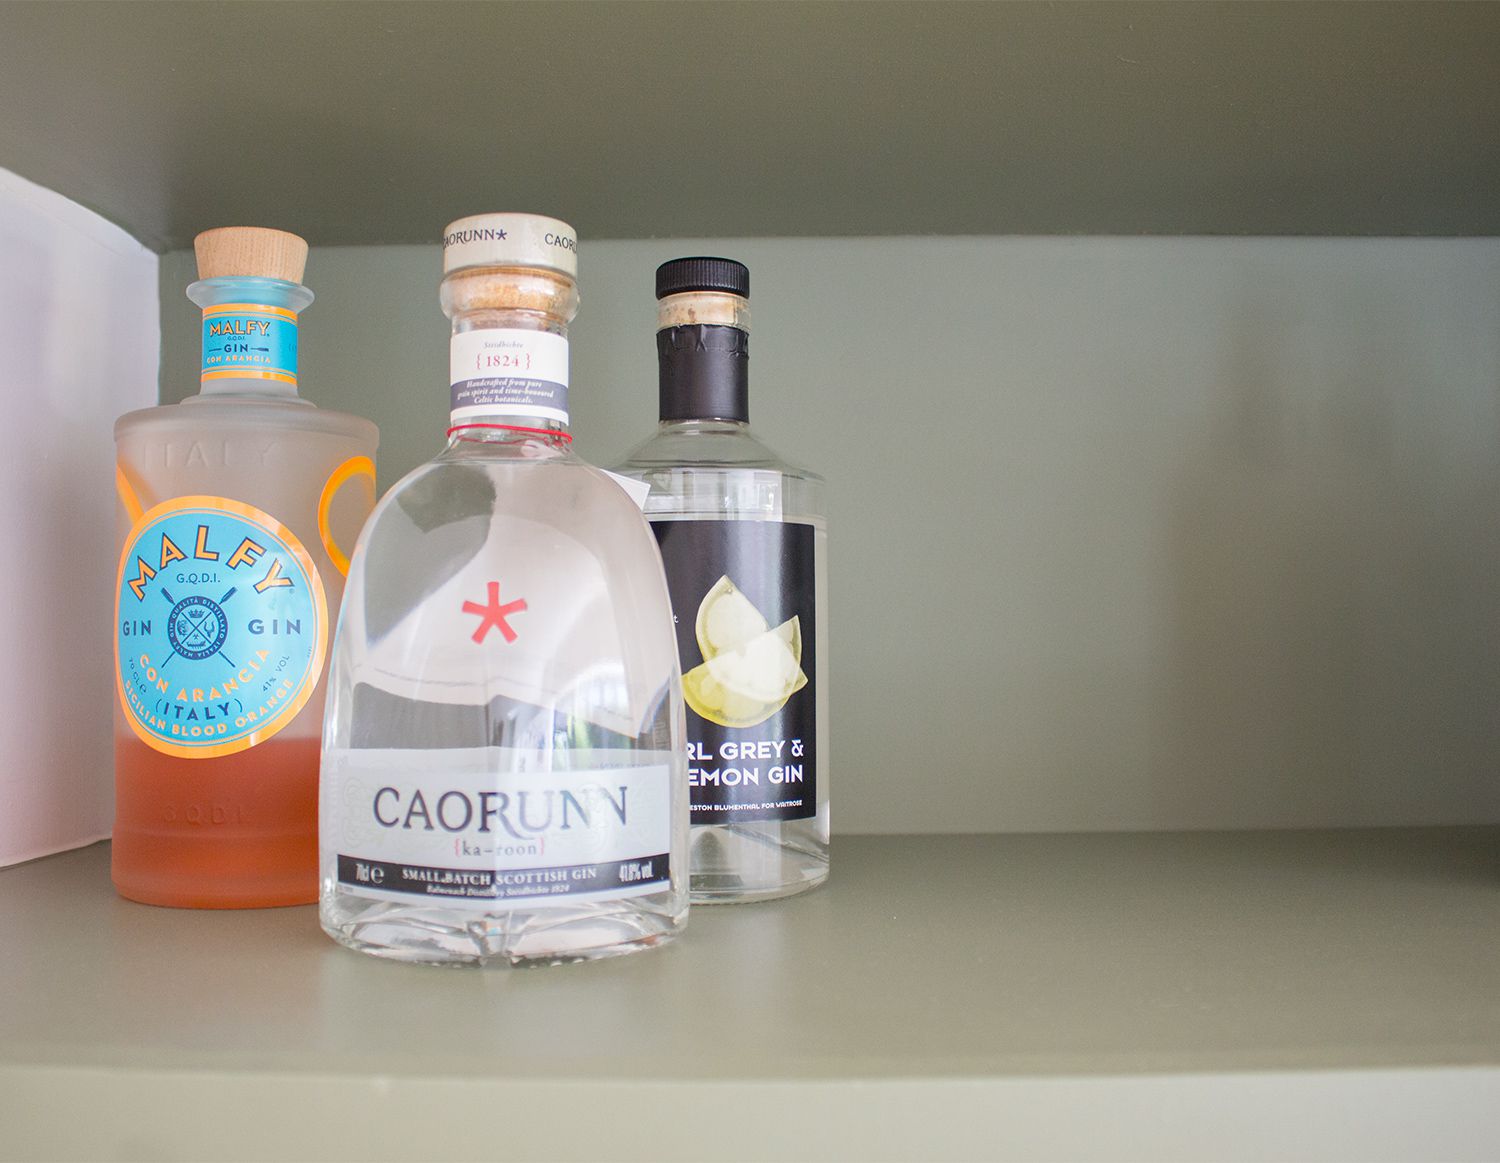 A close up of some gin bottles which are on the built in shelves.